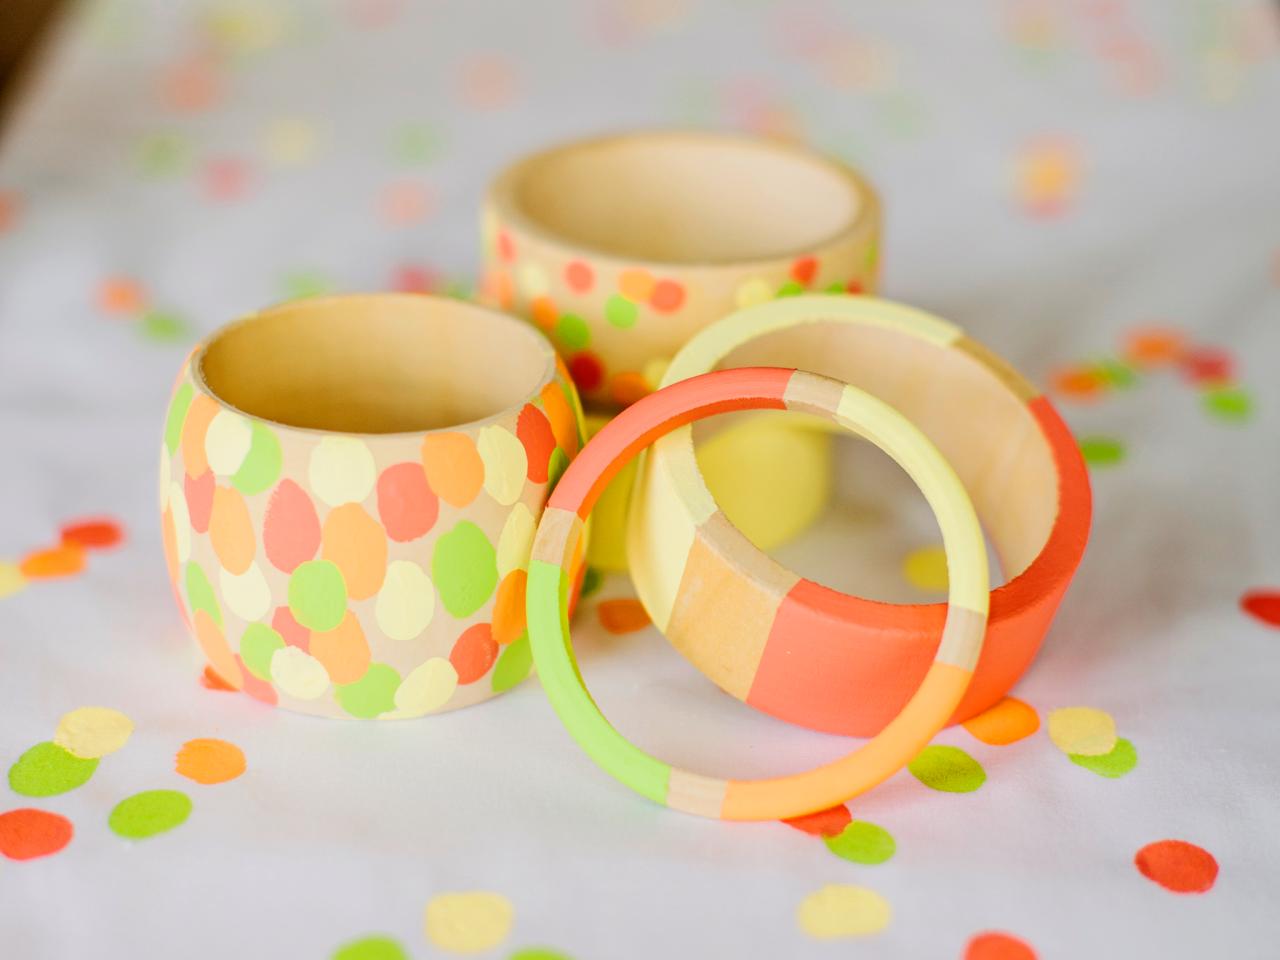 Handmade Mother's Day Gifts for Kids: Crafts Anyone Can Make!